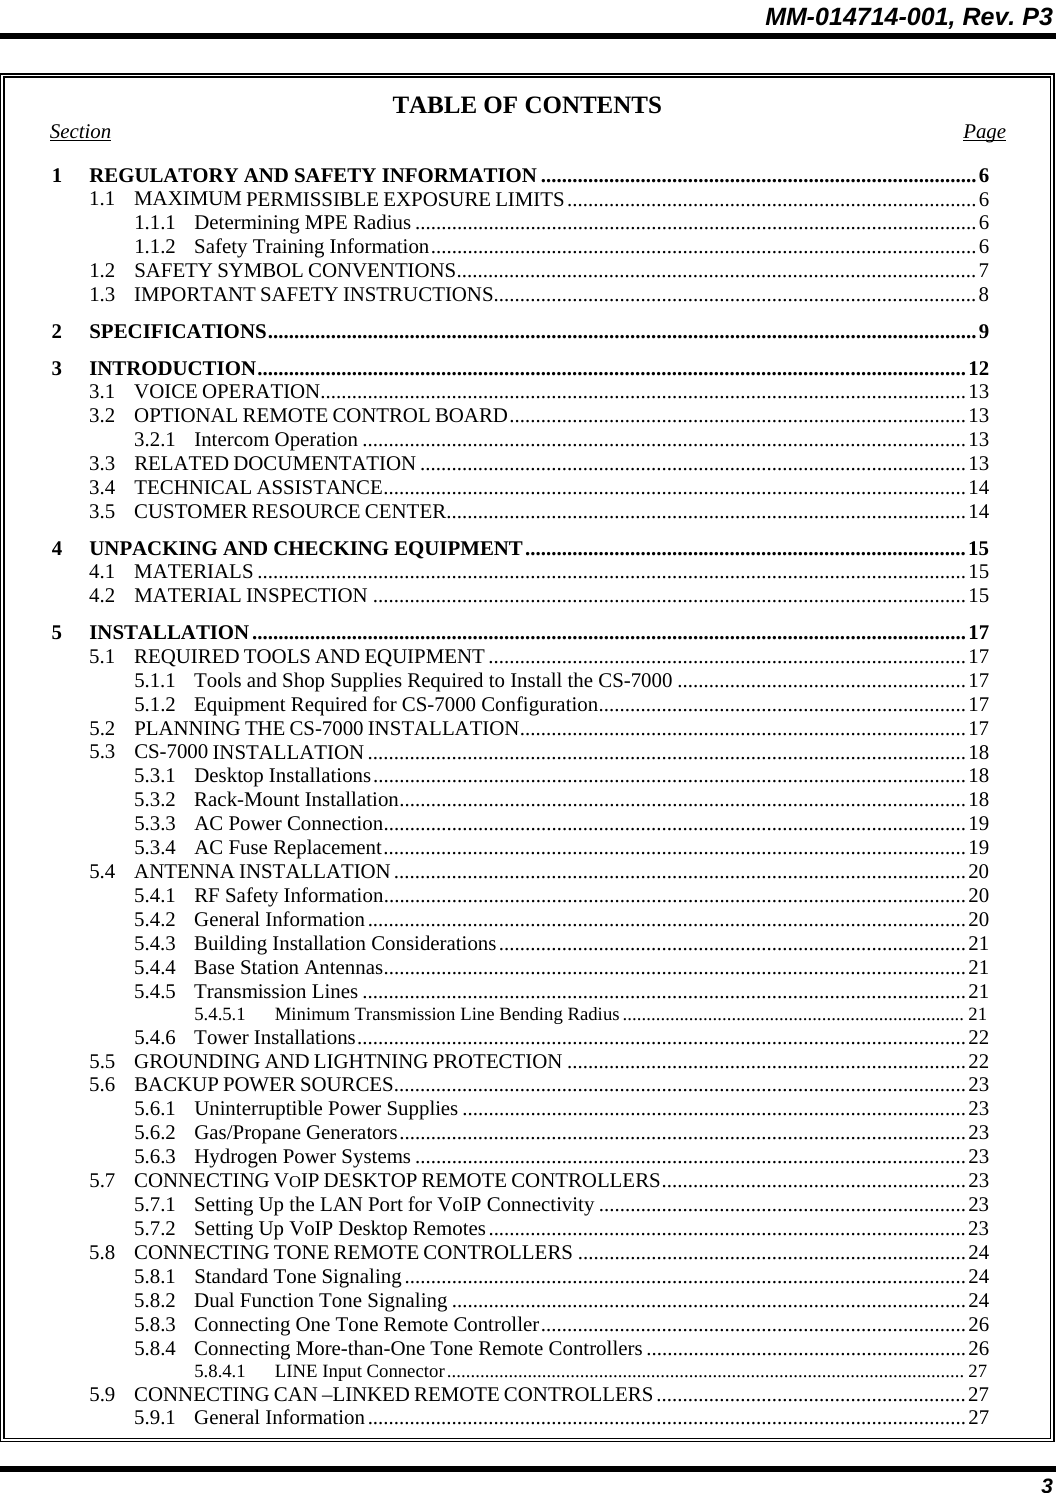 MM-014714-001, Rev. P3 3 TABLE OF CONTENTS Section Page 1  REGULATORY AND SAFETY INFORMATION ...................................................................................6 1.1 MAXIMUM PERMISSIBLE EXPOSURE LIMITS..............................................................................6 1.1.1 Determining MPE Radius ...........................................................................................................6 1.1.2 Safety Training Information........................................................................................................6 1.2 SAFETY SYMBOL CONVENTIONS...................................................................................................7 1.3 IMPORTANT SAFETY INSTRUCTIONS............................................................................................8 2 SPECIFICATIONS.......................................................................................................................................9 3 INTRODUCTION.......................................................................................................................................12 3.1 VOICE OPERATION...........................................................................................................................13 3.2 OPTIONAL REMOTE CONTROL BOARD.......................................................................................13 3.2.1 Intercom Operation ...................................................................................................................13 3.3 RELATED DOCUMENTATION ........................................................................................................13 3.4 TECHNICAL ASSISTANCE...............................................................................................................14 3.5 CUSTOMER RESOURCE CENTER...................................................................................................14 4  UNPACKING AND CHECKING EQUIPMENT....................................................................................15 4.1 MATERIALS .......................................................................................................................................15 4.2 MATERIAL INSPECTION .................................................................................................................15 5 INSTALLATION........................................................................................................................................17 5.1 REQUIRED TOOLS AND EQUIPMENT...........................................................................................17 5.1.1  Tools and Shop Supplies Required to Install the CS-7000 .......................................................17 5.1.2  Equipment Required for CS-7000 Configuration......................................................................17 5.2 PLANNING THE CS-7000 INSTALLATION.....................................................................................17 5.3 CS-7000 INSTALLATION ..................................................................................................................18 5.3.1 Desktop Installations.................................................................................................................18 5.3.2 Rack-Mount Installation............................................................................................................18 5.3.3  AC Power Connection...............................................................................................................19 5.3.4  AC Fuse Replacement...............................................................................................................19 5.4 ANTENNA INSTALLATION.............................................................................................................20 5.4.1 RF Safety Information...............................................................................................................20 5.4.2 General Information..................................................................................................................20 5.4.3 Building Installation Considerations.........................................................................................21 5.4.4 Base Station Antennas...............................................................................................................21 5.4.5 Transmission Lines ...................................................................................................................21 5.4.5.1 Minimum Transmission Line Bending Radius........................................................................ 21 5.4.6 Tower Installations....................................................................................................................22 5.5 GROUNDING AND LIGHTNING PROTECTION ............................................................................22 5.6 BACKUP POWER SOURCES.............................................................................................................23 5.6.1  Uninterruptible Power Supplies ................................................................................................23 5.6.2 Gas/Propane Generators............................................................................................................23 5.6.3  Hydrogen Power Systems .........................................................................................................23 5.7 CONNECTING VOIP DESKTOP REMOTE CONTROLLERS..........................................................23 5.7.1  Setting Up the LAN Port for VoIP Connectivity ......................................................................23 5.7.2 Setting Up VoIP Desktop Remotes...........................................................................................23 5.8 CONNECTING TONE REMOTE CONTROLLERS ..........................................................................24 5.8.1 Standard Tone Signaling...........................................................................................................24 5.8.2 Dual Function Tone Signaling ..................................................................................................24 5.8.3 Connecting One Tone Remote Controller.................................................................................26 5.8.4 Connecting More-than-One Tone Remote Controllers .............................................................26 5.8.4.1 LINE Input Connector............................................................................................................. 27 5.9 CONNECTING CAN –LINKED REMOTE CONTROLLERS...........................................................27 5.9.1 General Information..................................................................................................................27 